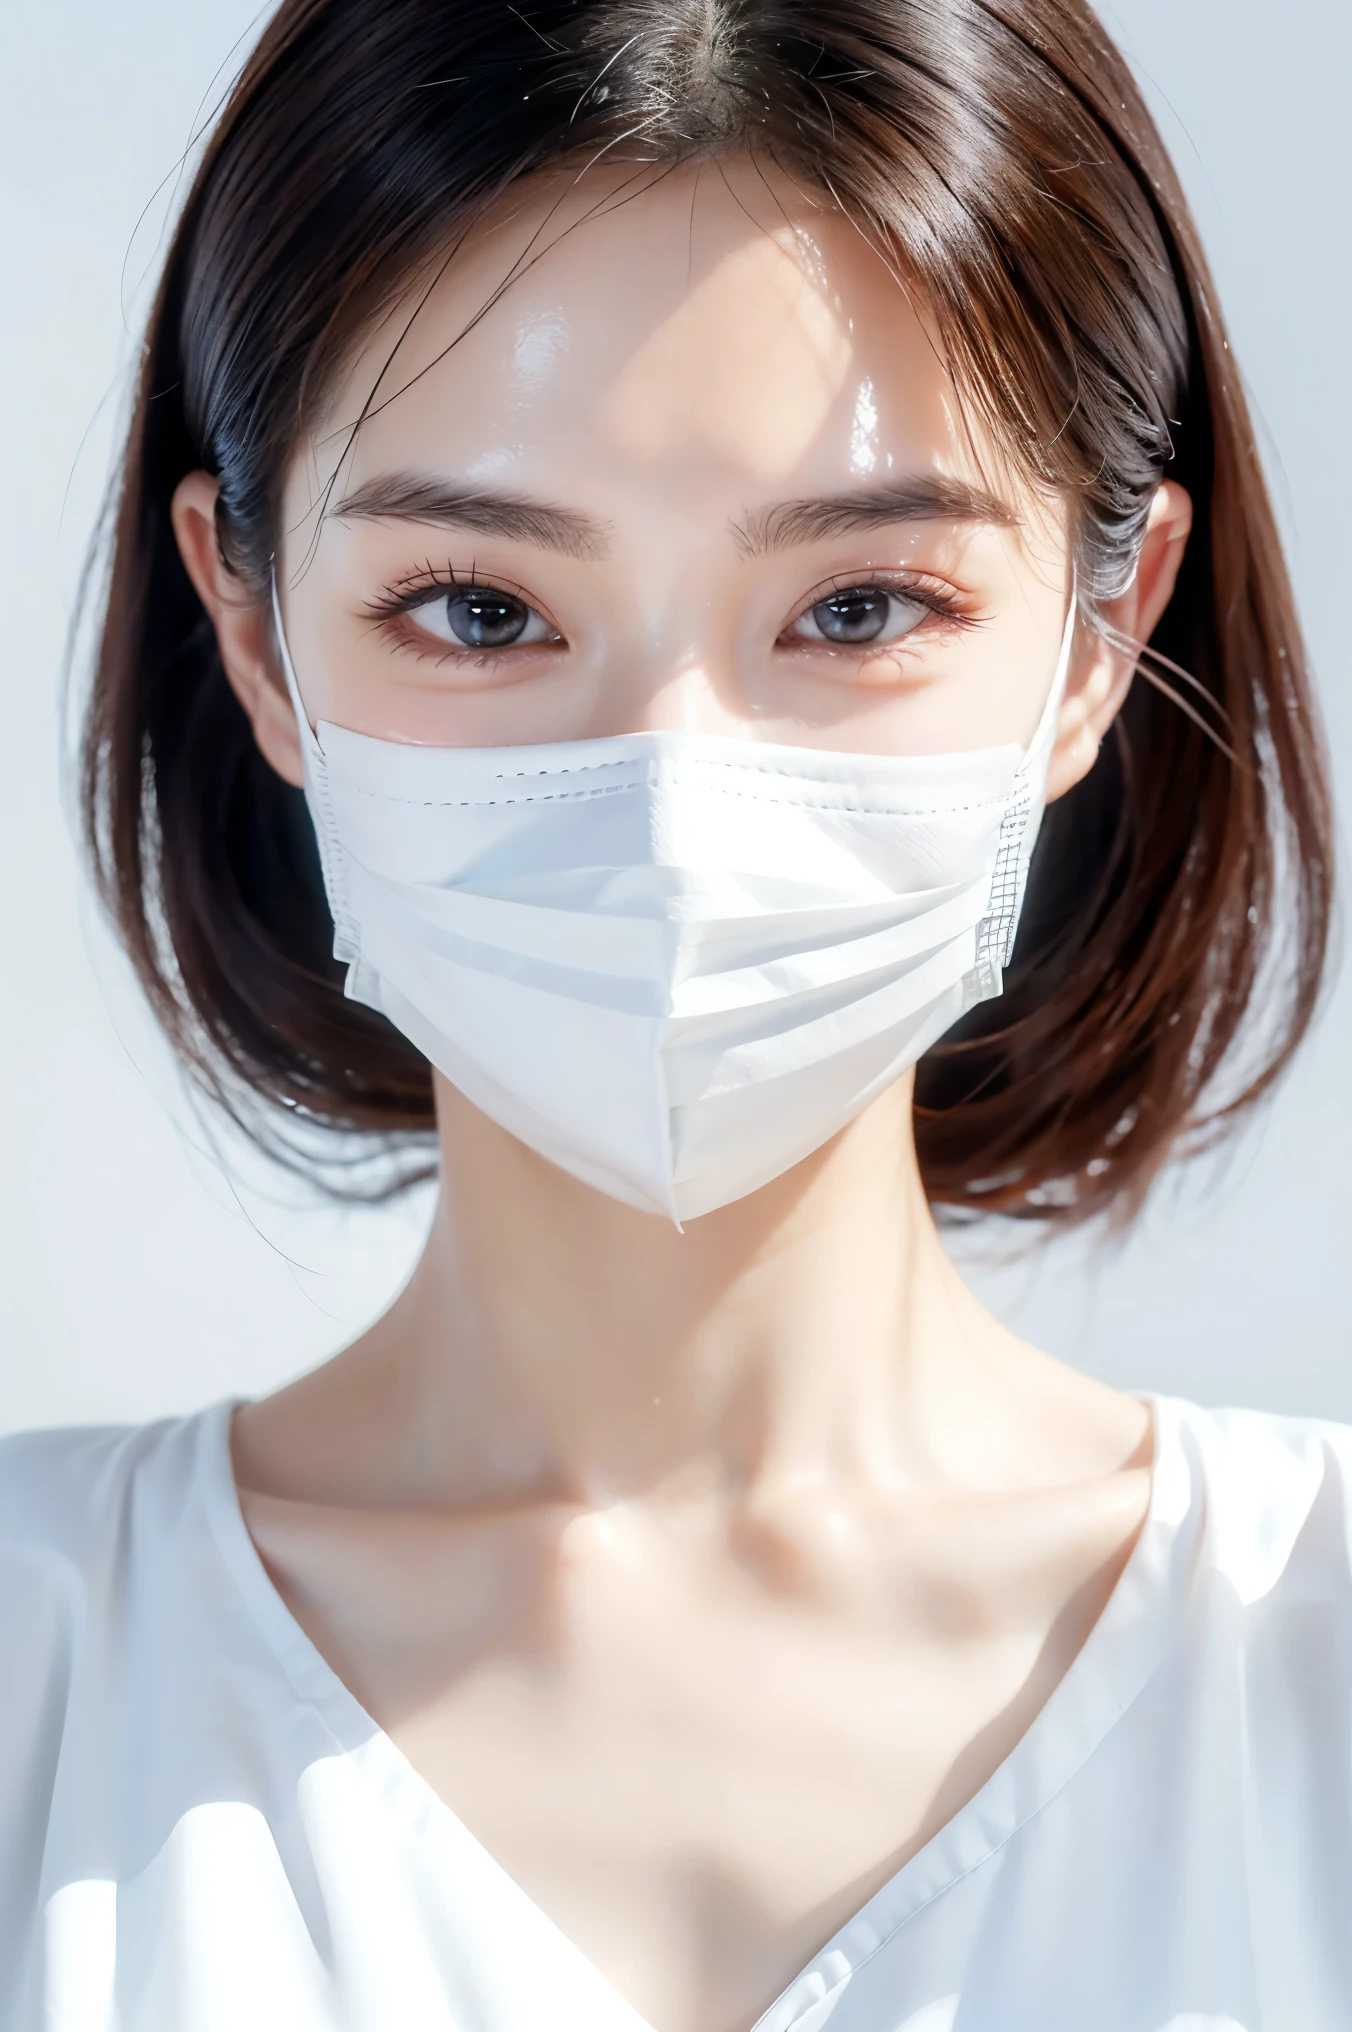 (Tabletop、highest quality、8k、Award-winning works、Ultra-high resolution)、(One beautiful nurse:1.1)、(The perfect white nurse coat:1.1)、(White Mask:1.2)、Chignon、Shiny, beautiful hair、Accurate anatomy、(Solid white background:1.3)、(very bright white lighting:1.1)、(Close-up of face:1.3)、Perfect beautiful makeup、Spectacular Cinema Lighting、Tyndall effect、(standing elegantly:1.1)、(Shining white skin:1.1)、Shiny beautiful skin、Radiant Skin